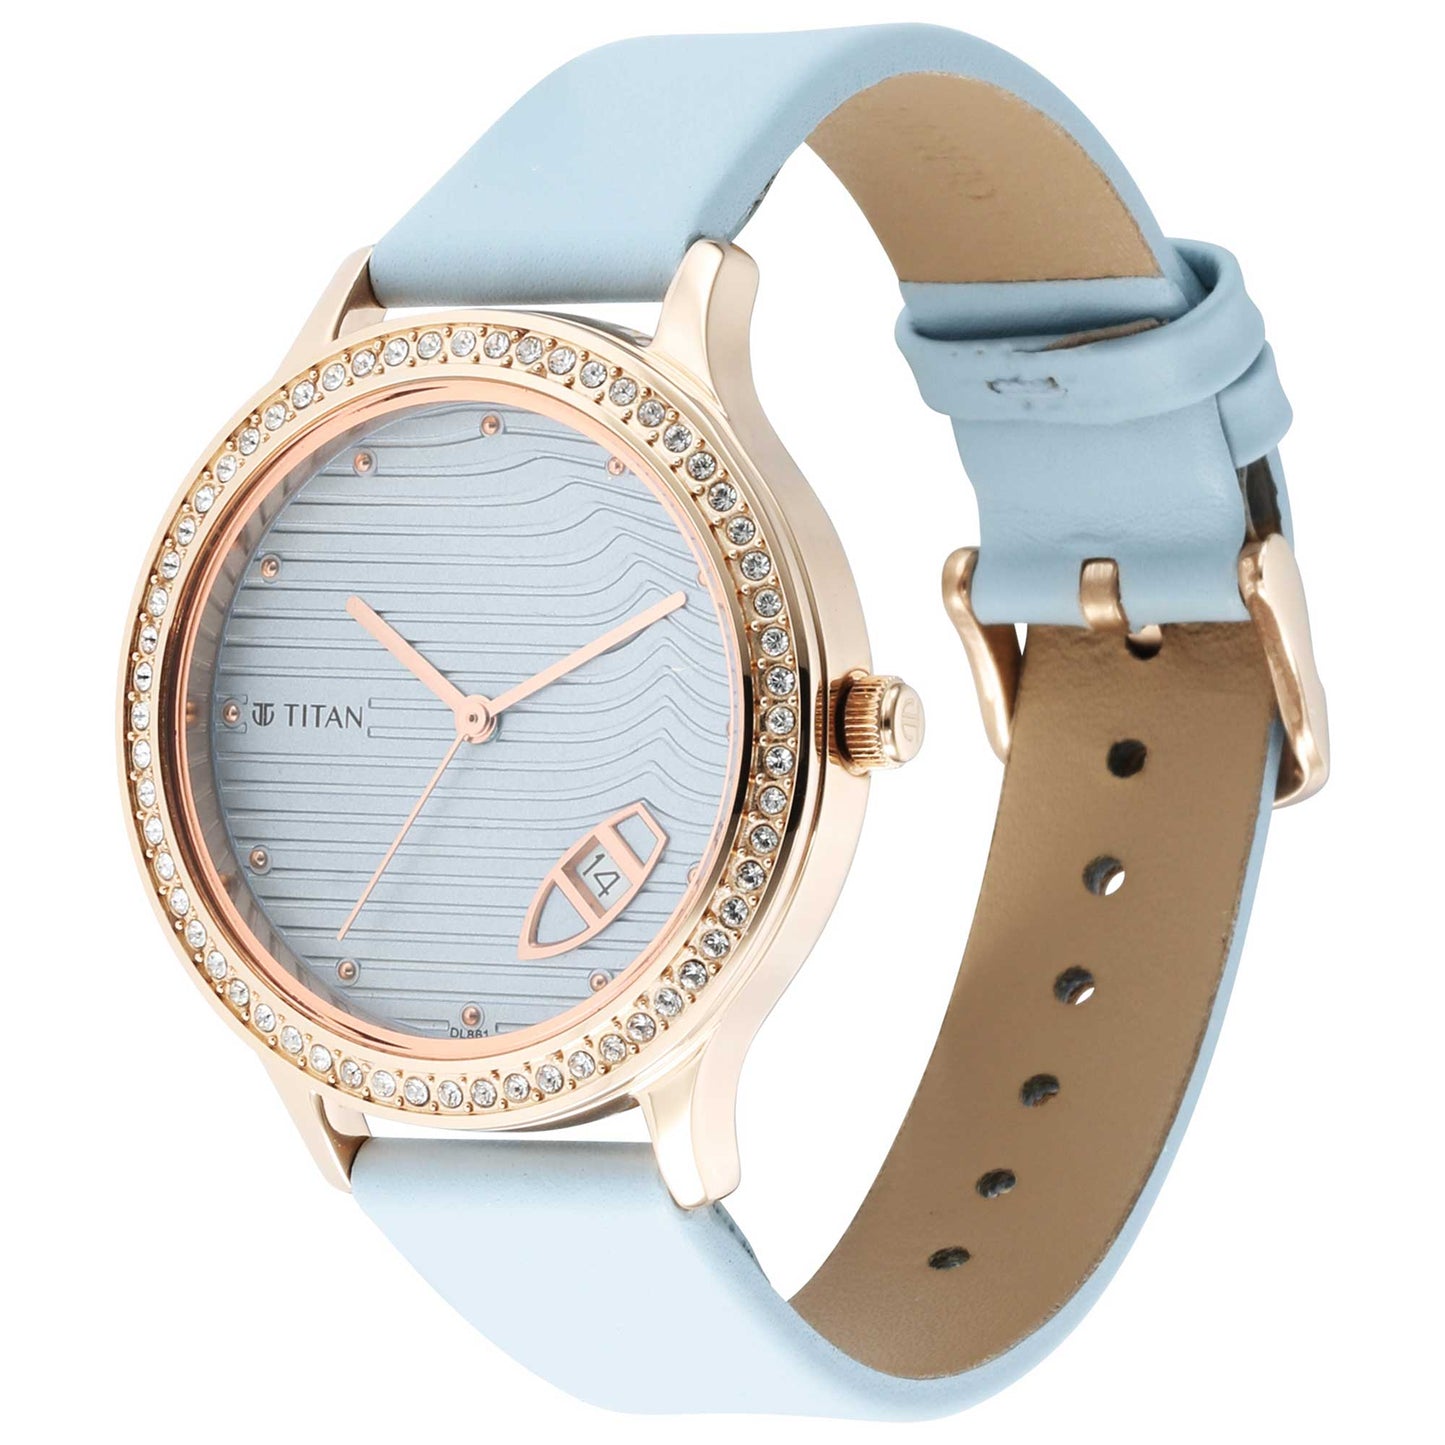 Titan Wander Blue Dial Women Watch With Leather Strap